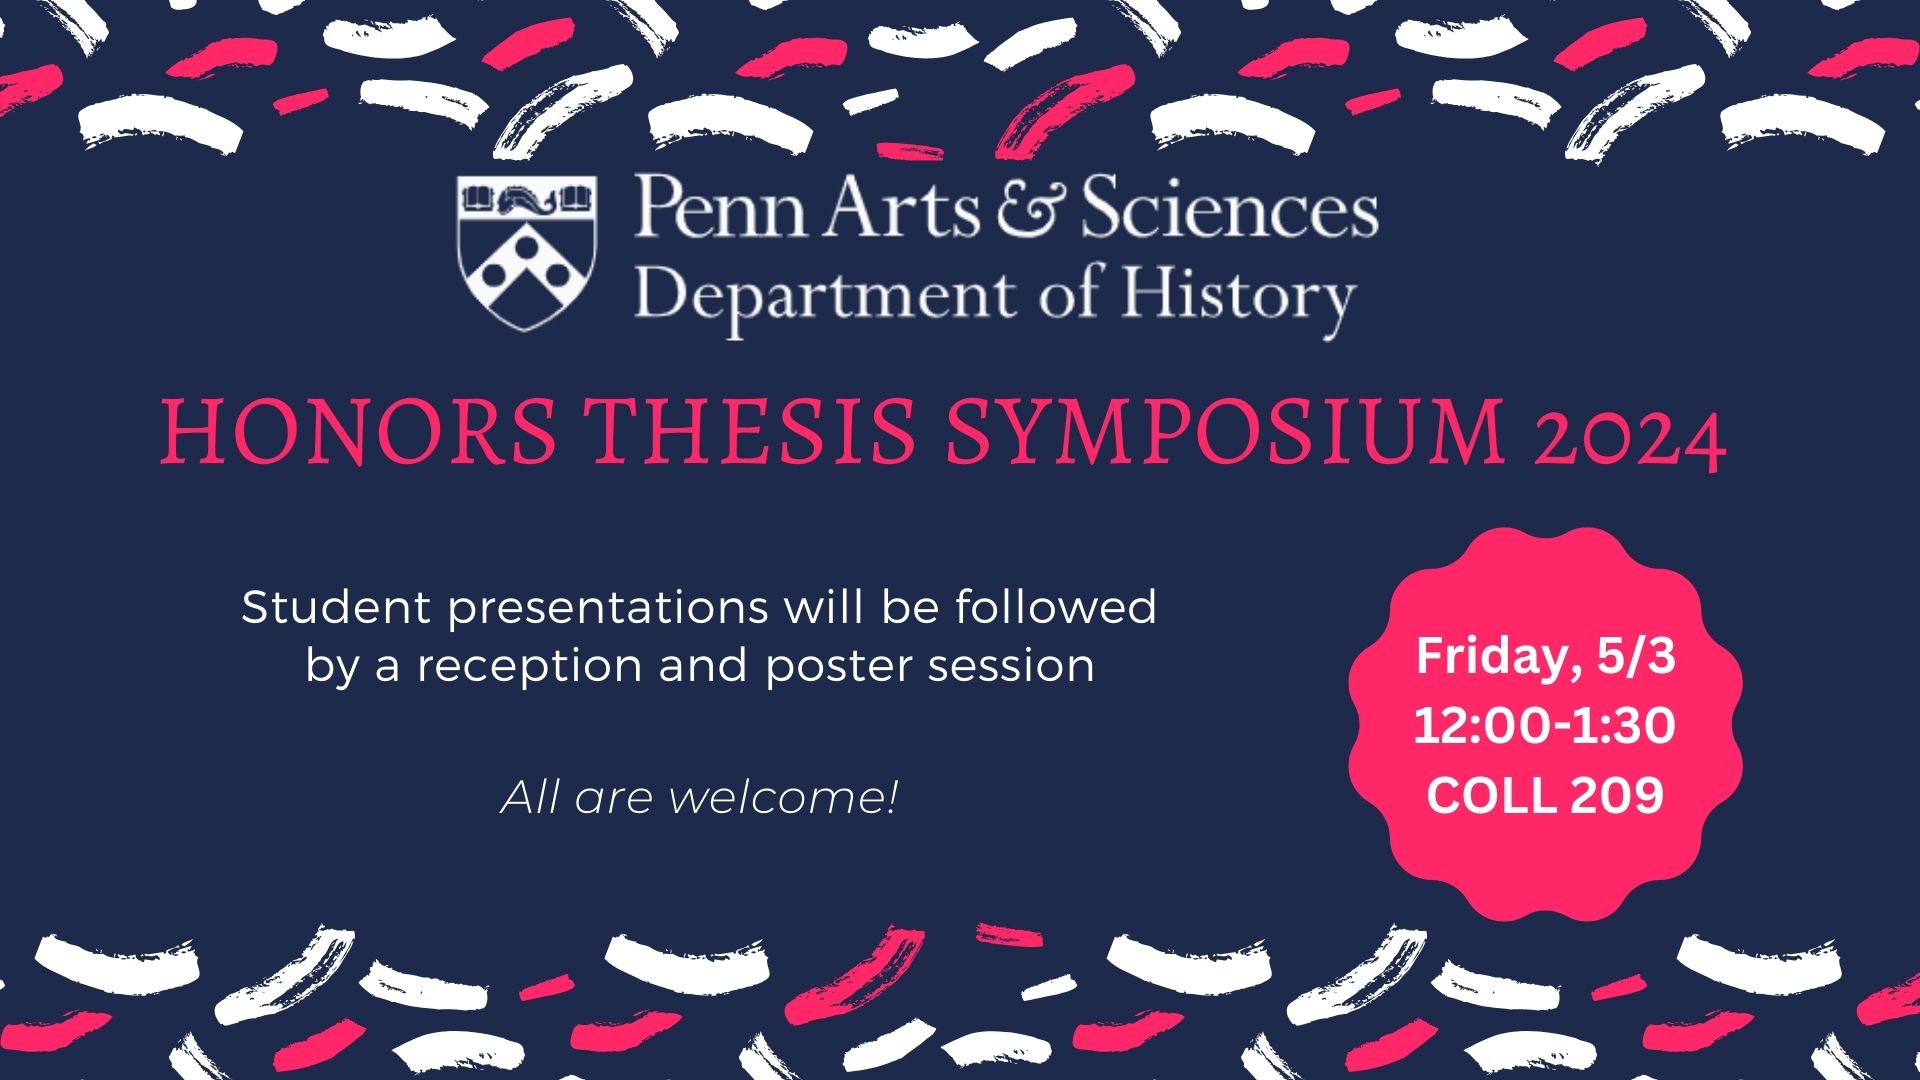 Blue background with white and red confetti.  Text reads, "Penn Arts and Sciences Department of History Honors Theiss Symposium 2024.  Student presentations will be followed by a reception and poster session. Friday, May 3, 12:00-1:30, COLL 209.  All are welcome. 